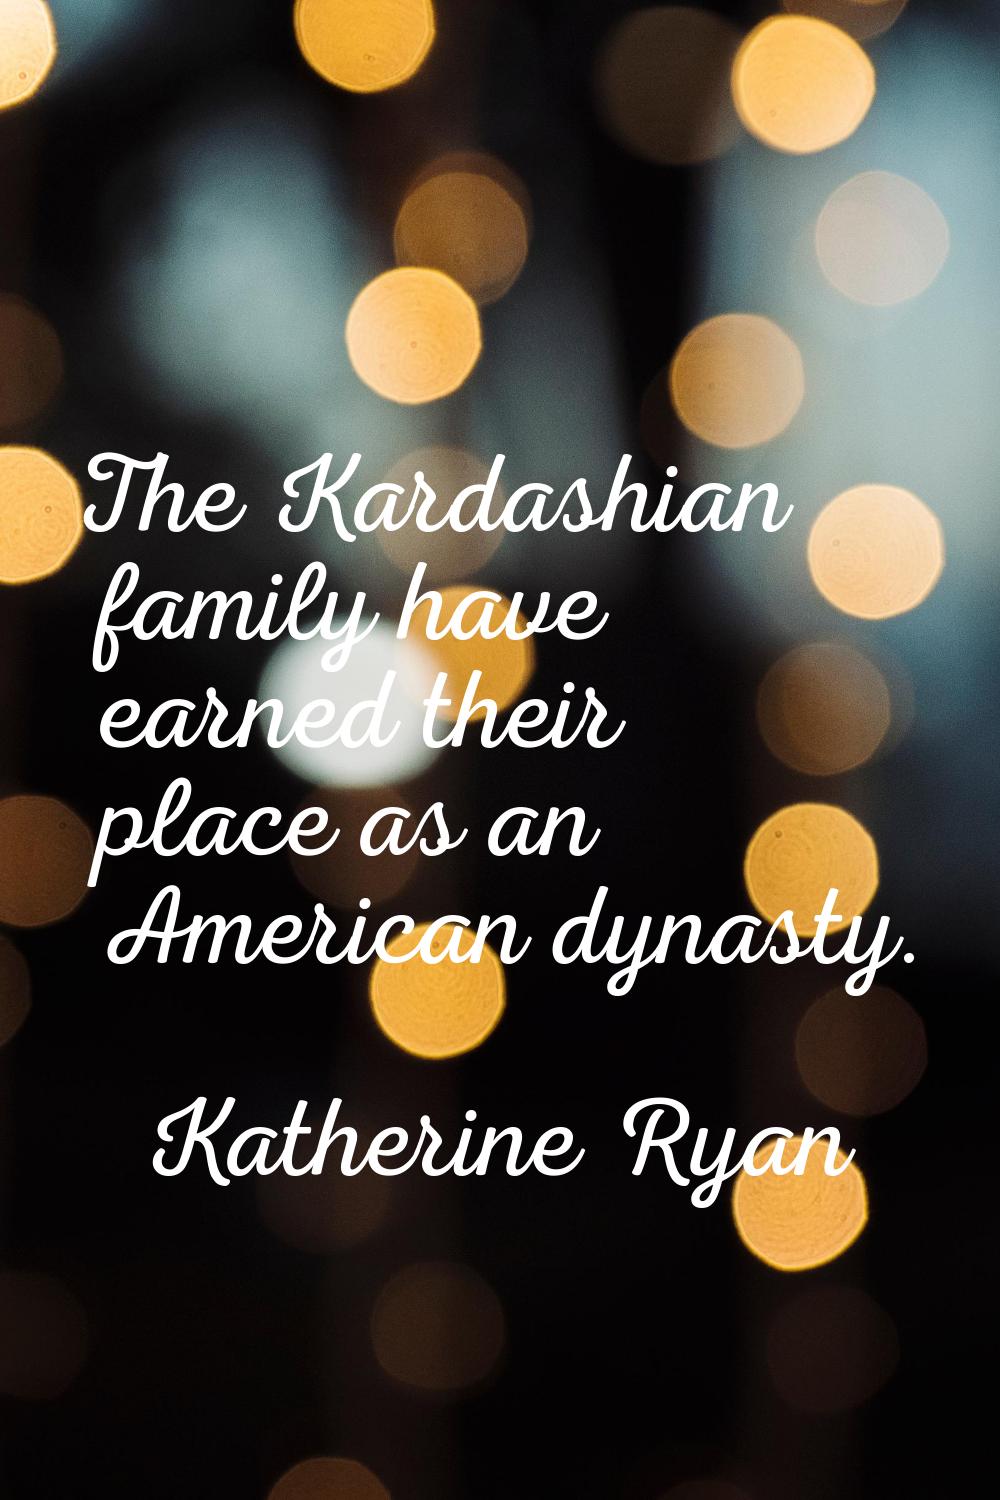 The Kardashian family have earned their place as an American dynasty.